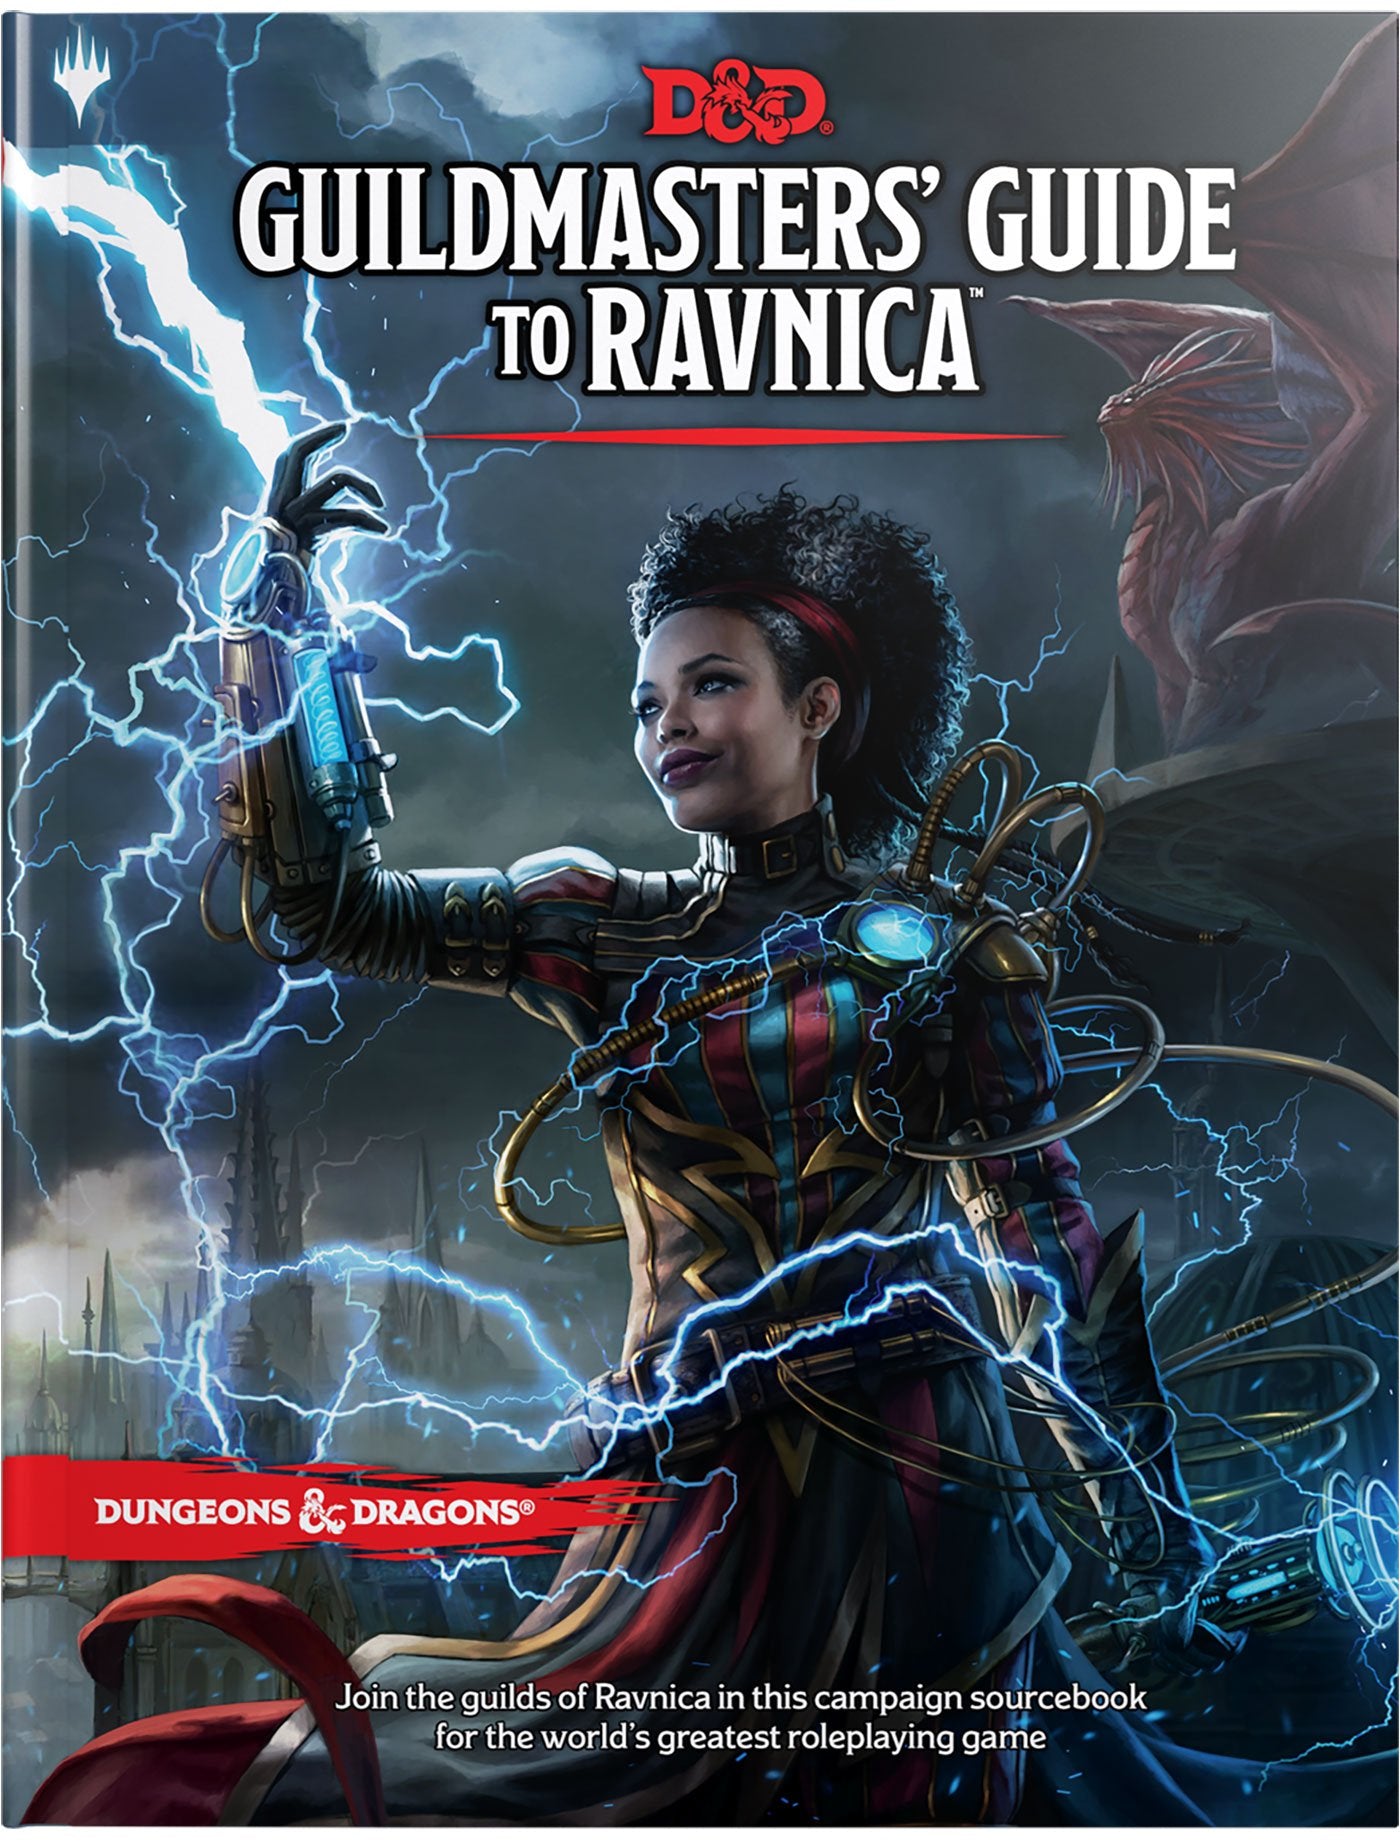 DUNGEONS & DRAGONS: Guildmasters' Guide to Ravnica 5E - Linebreakers